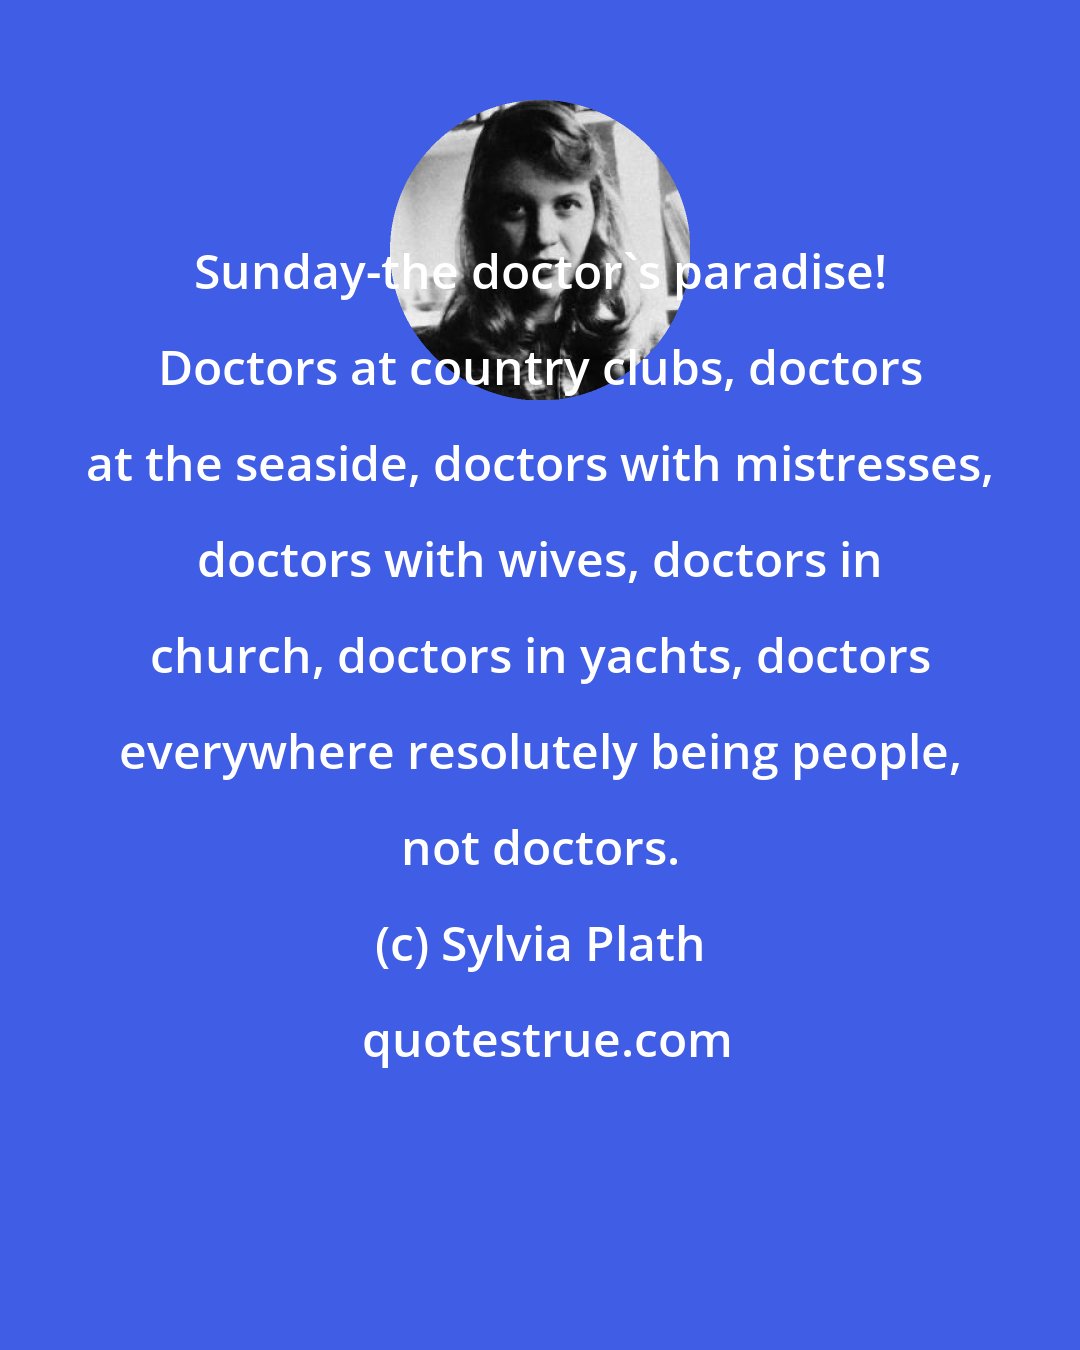 Sylvia Plath: Sunday-the doctor's paradise! Doctors at country clubs, doctors at the seaside, doctors with mistresses, doctors with wives, doctors in church, doctors in yachts, doctors everywhere resolutely being people, not doctors.